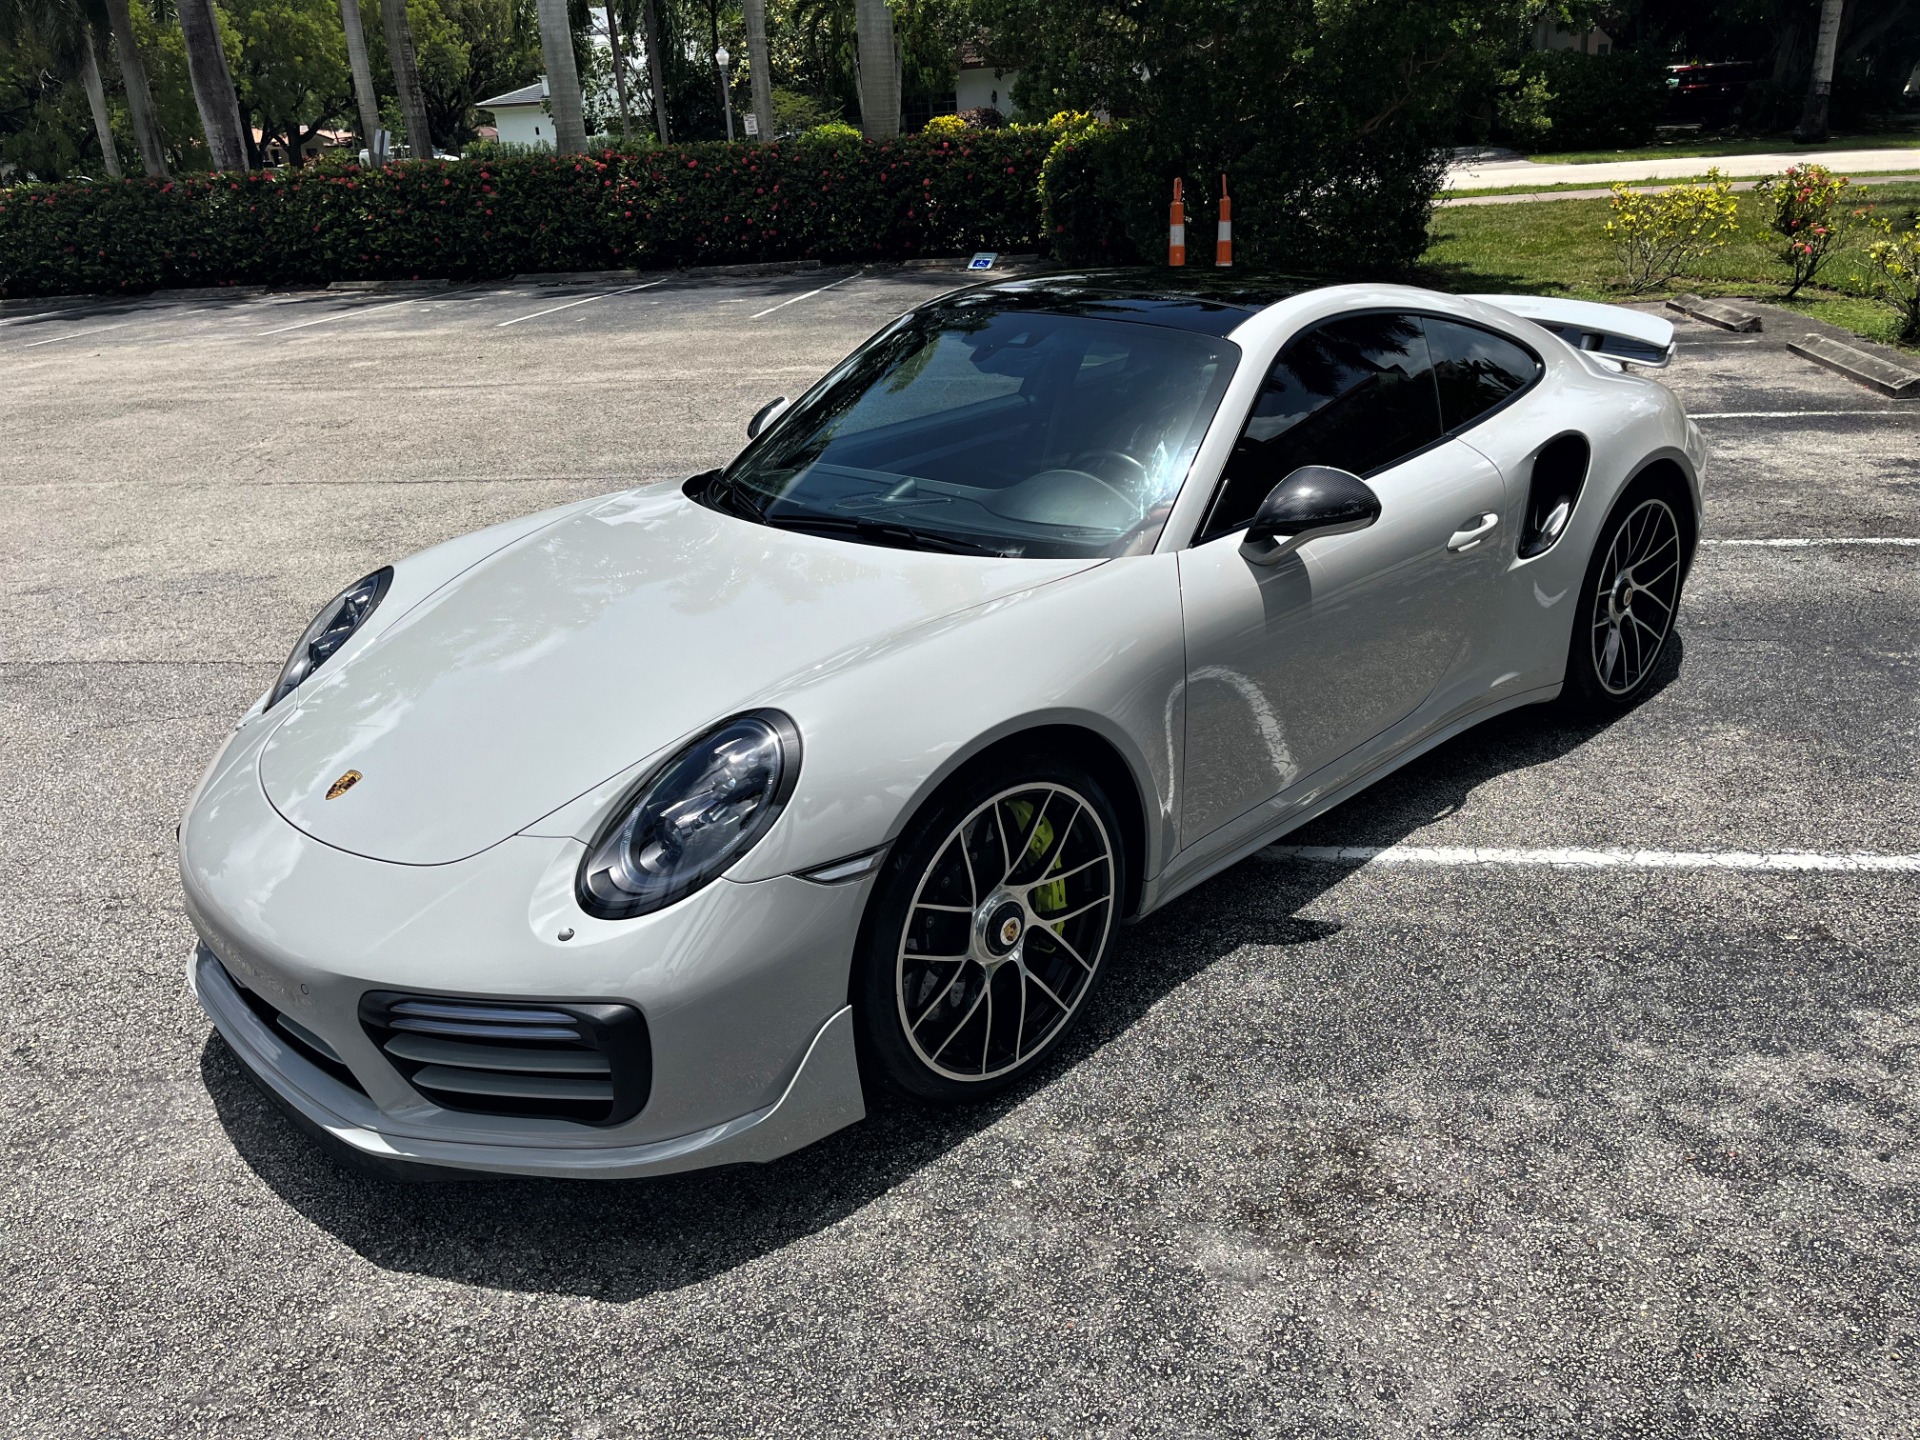 Used 2018 Porsche 911 Turbo S for sale Sold at The Gables Sports Cars in Miami FL 33146 2